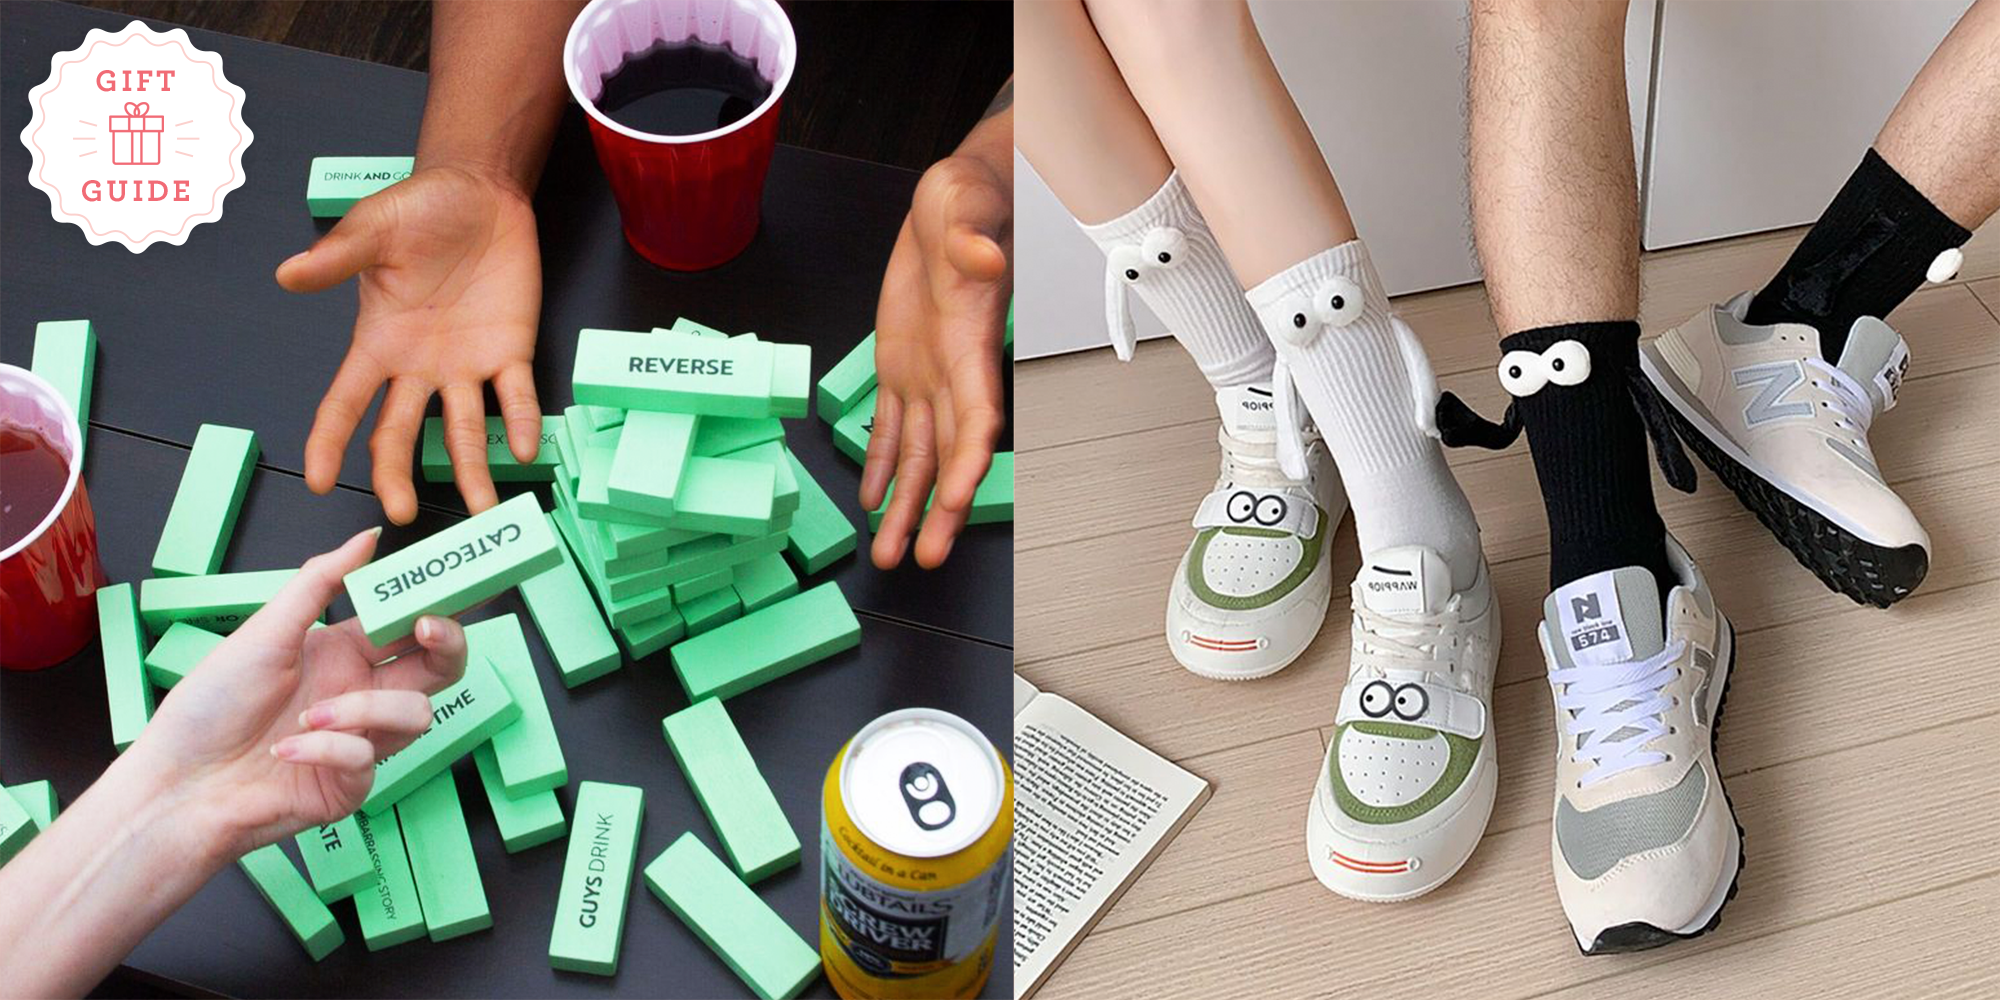 Fun and thoughtful Secret Santa gift ideas to swear by this Christmas